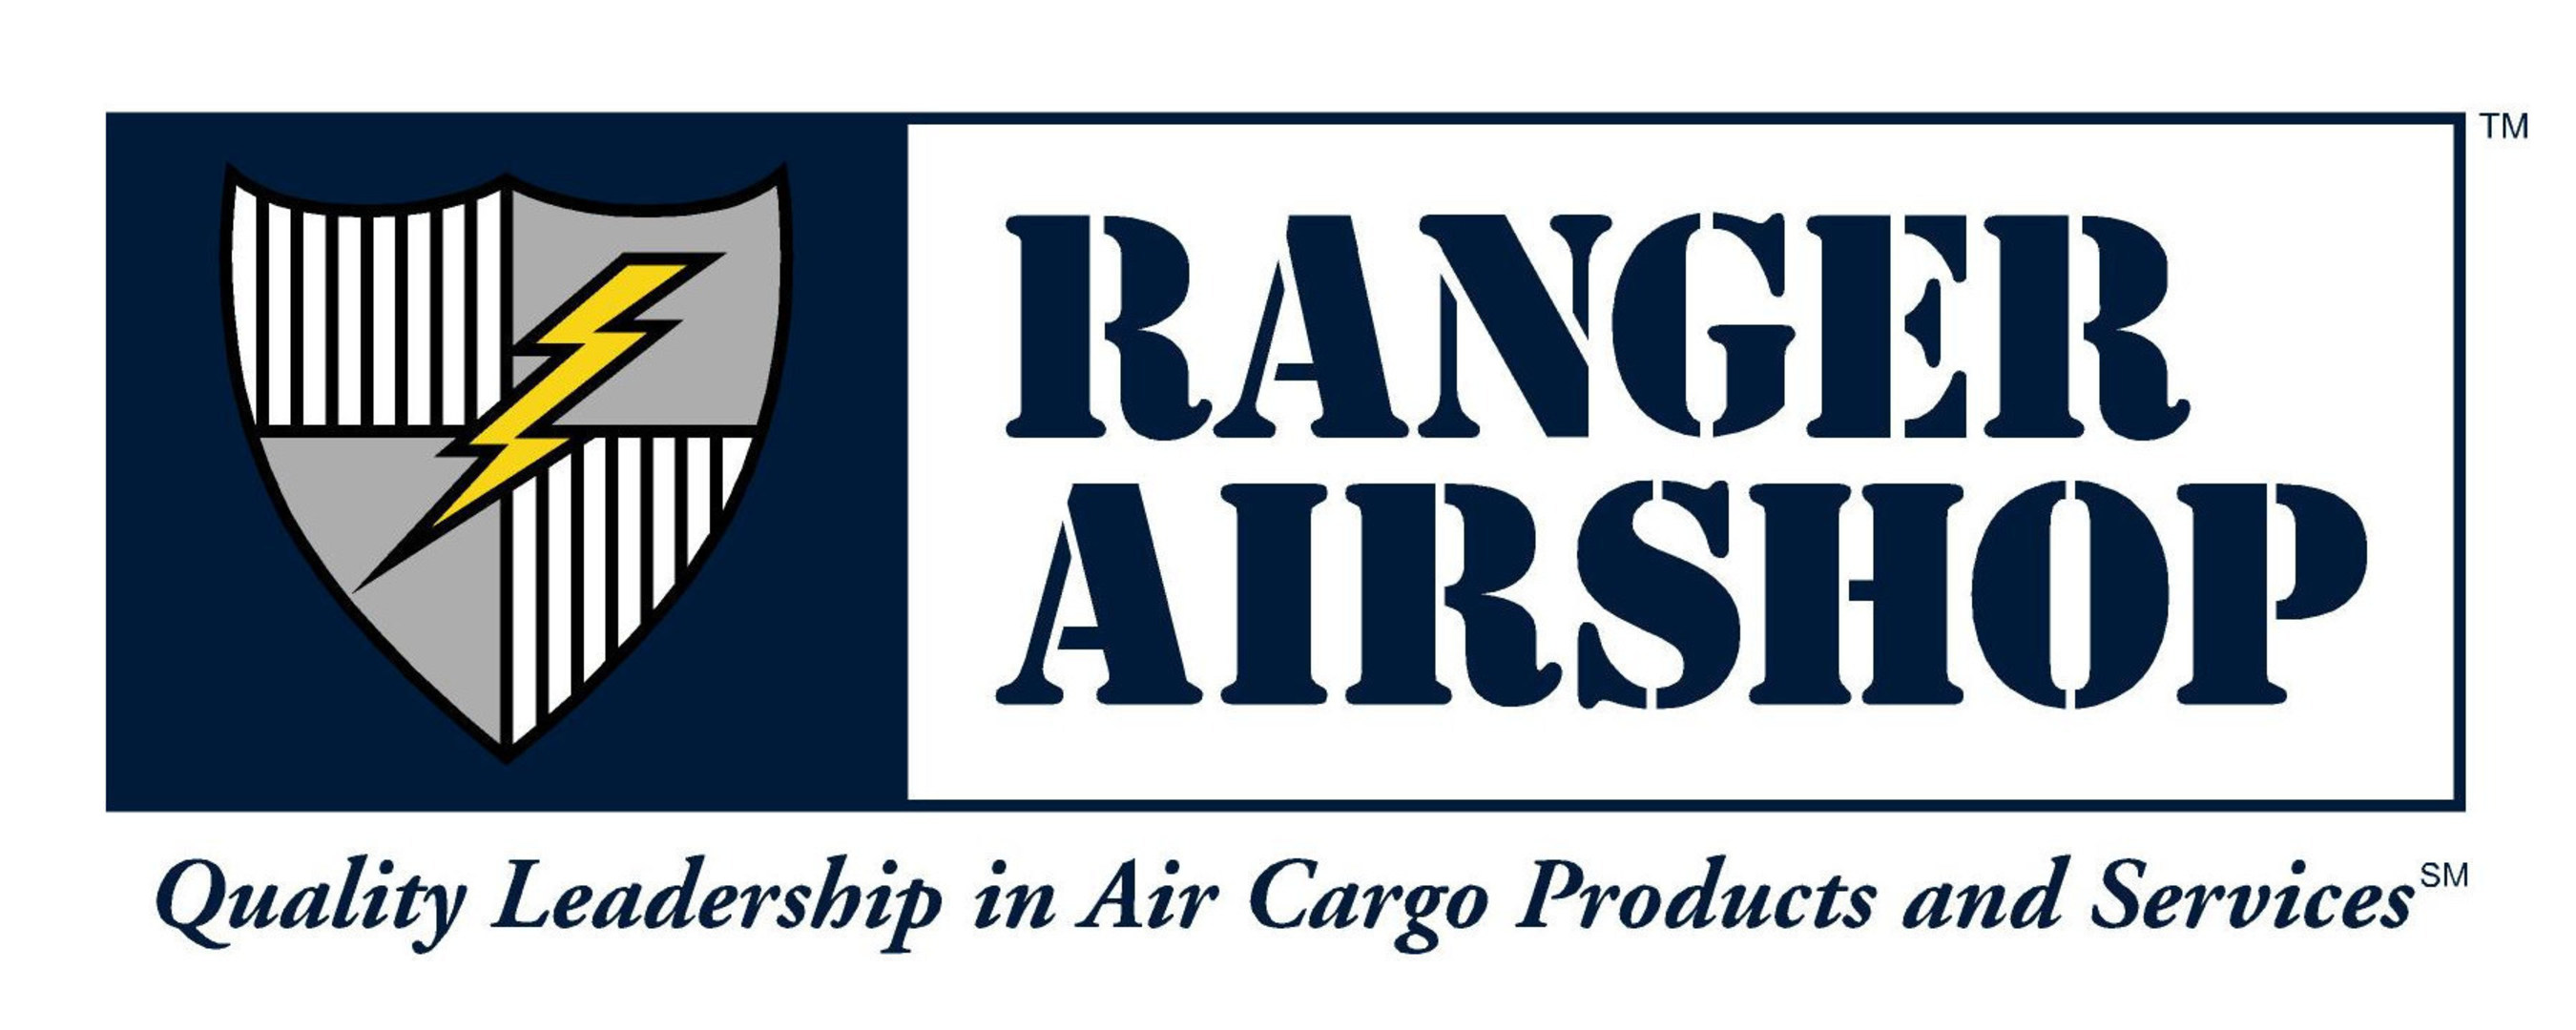 Ranger AirShop Holdings, Inc. is the latest private equity consolidation platform created and managed by Ranger Aerospace and its institutional co-investors. Since 1997, Ranger Aerospace has been buying and building-up aviation services and aerospace specialty companies. The new Ranger AirShop enterprise serves the global Air Cargo industry by manufacturing, selling, leasing, repairing, and managing 'ULD's,' with service branches at more than half of the world's Top Fifty air cargo hubs. Website: www.rangeraerospace.com